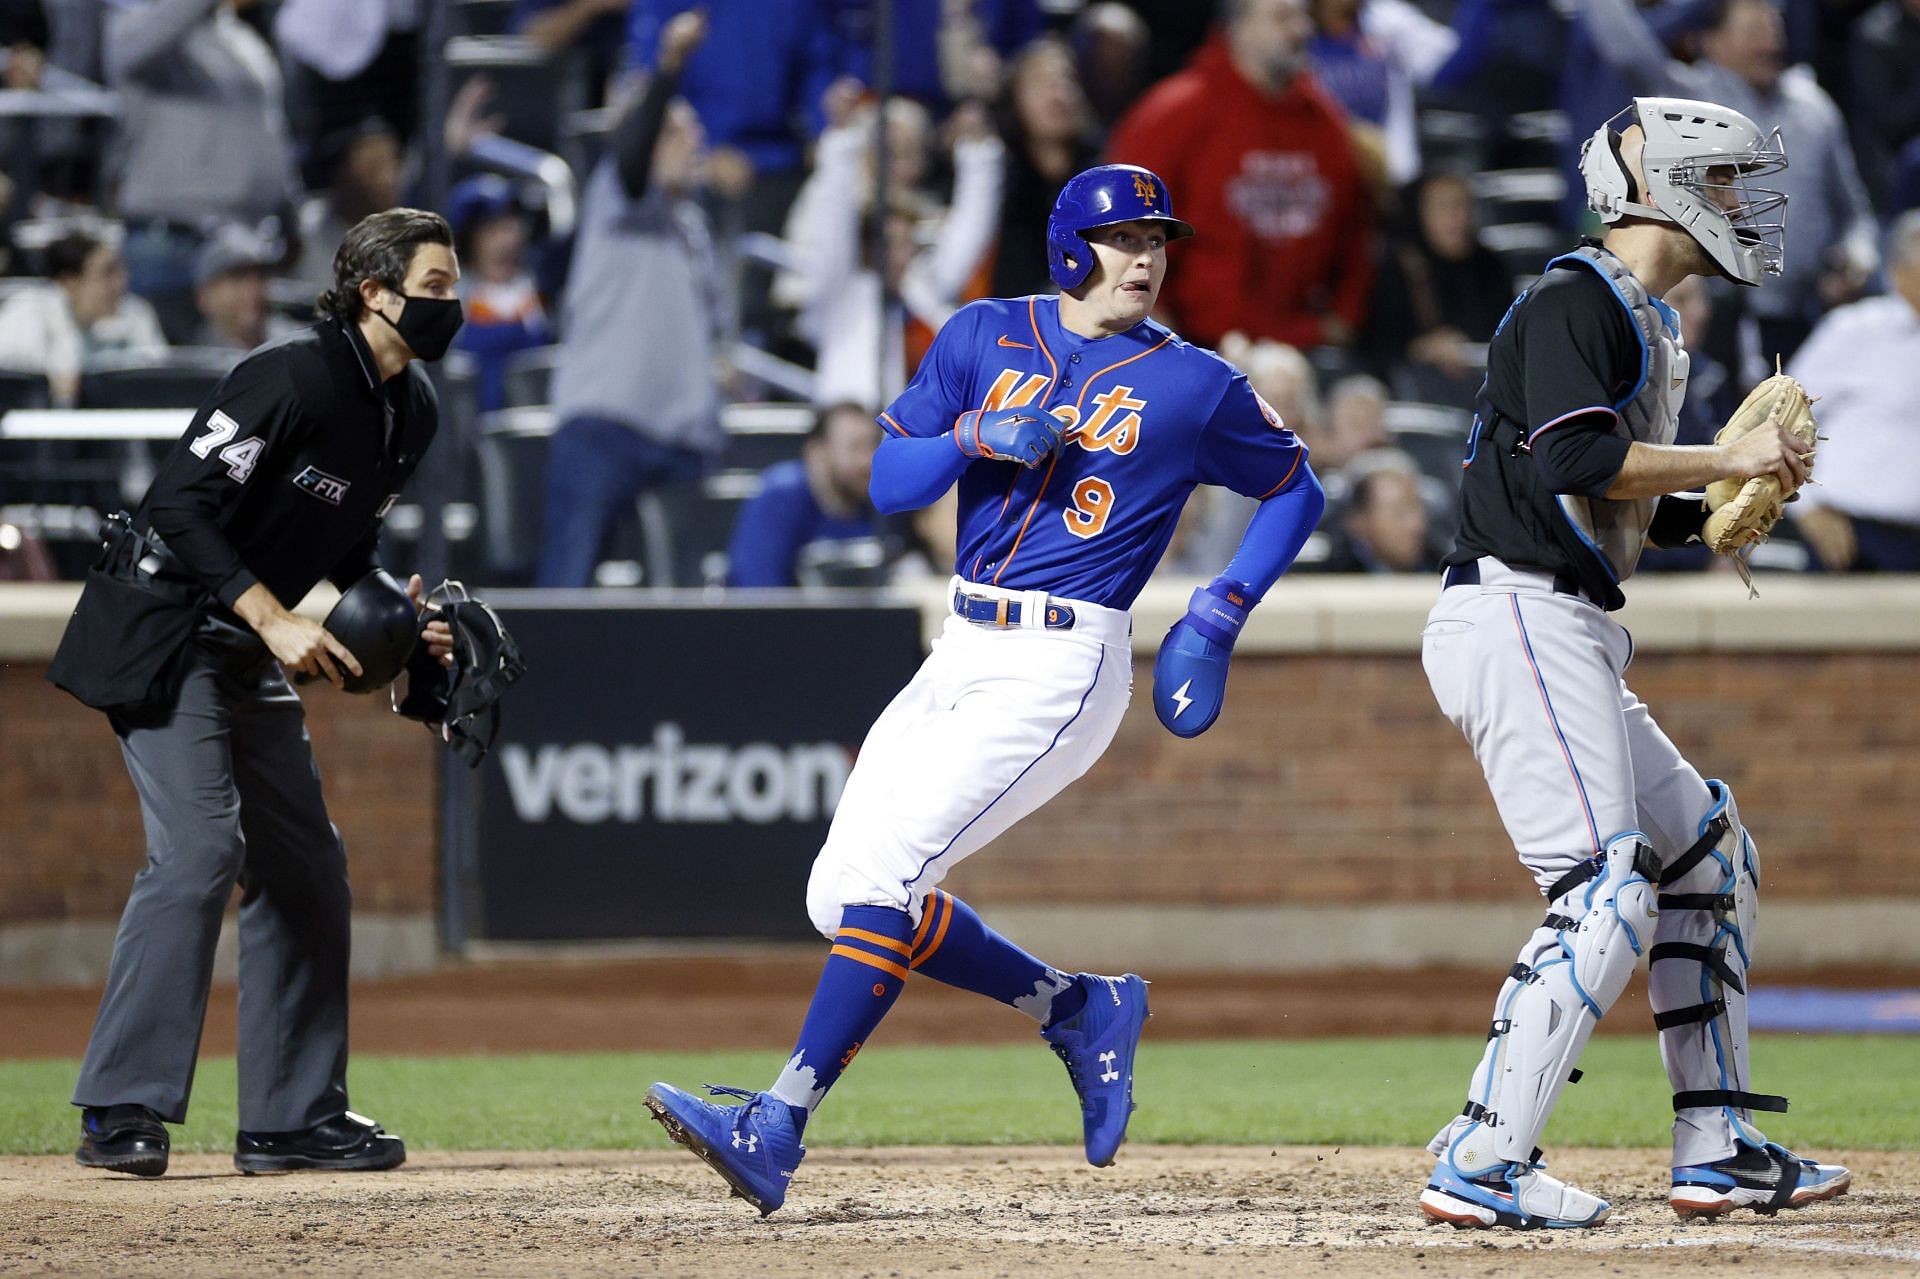 Miami Marlins vs New York Mets MLB opening day live TV listings, streaming options, and more